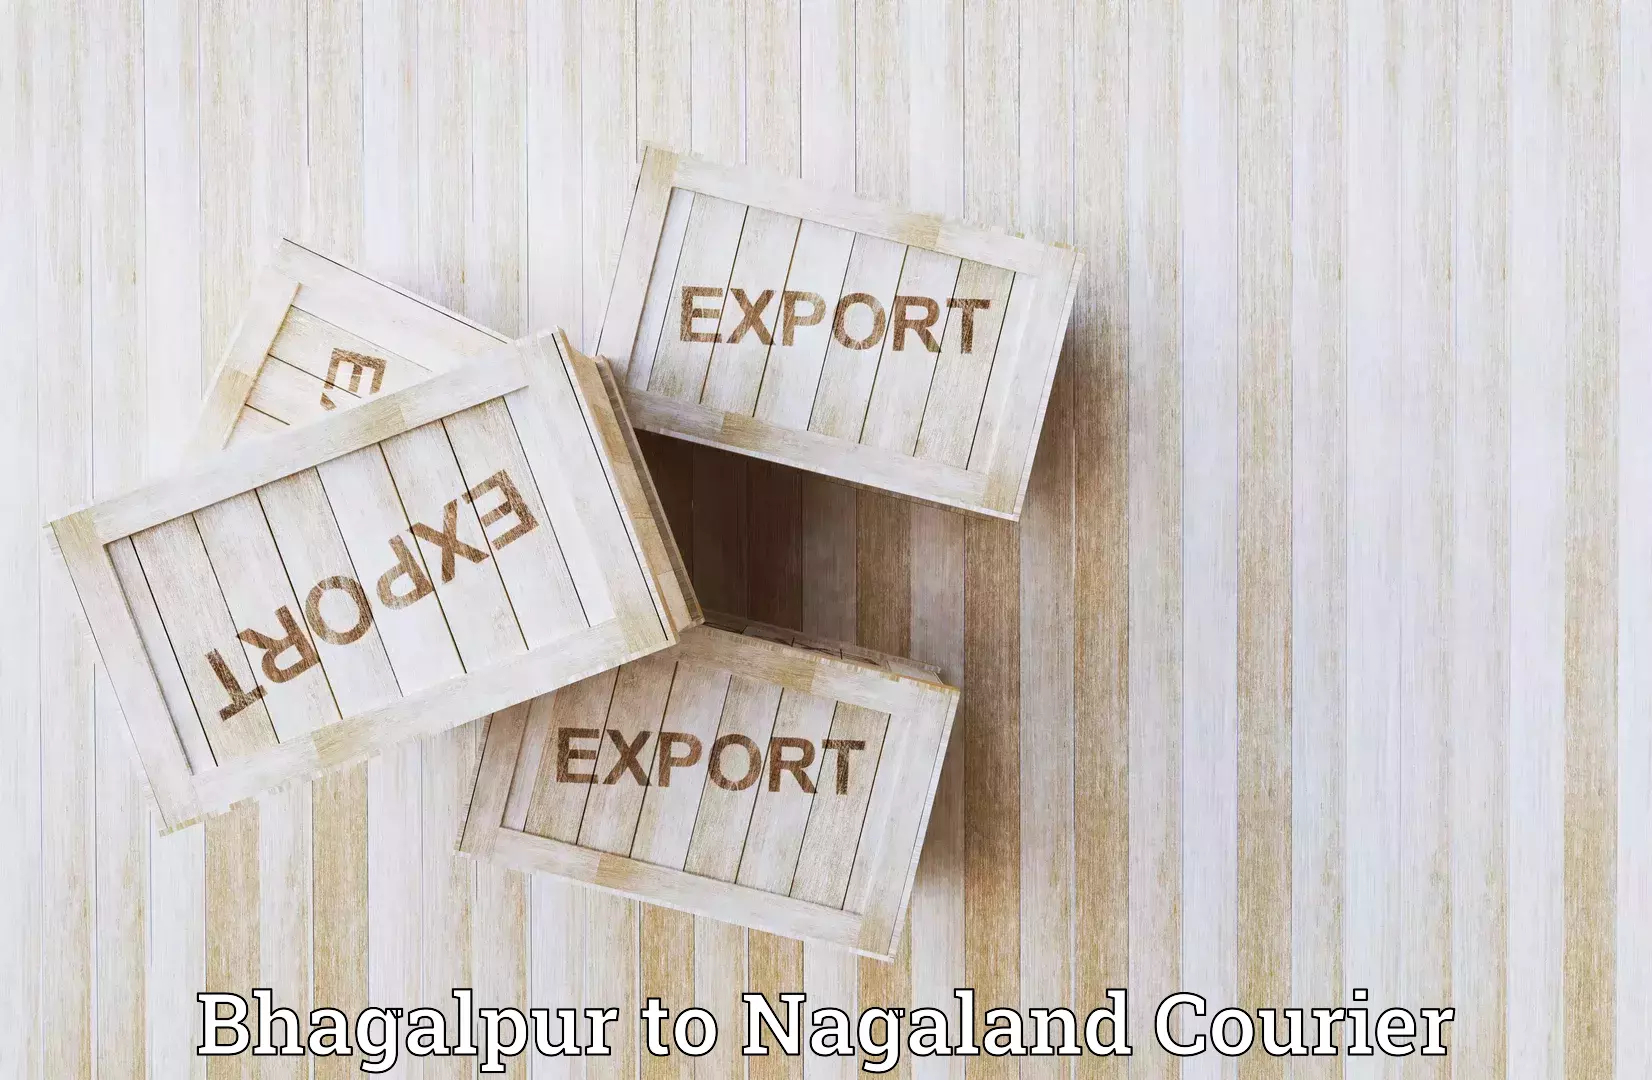 Comprehensive shipping services in Bhagalpur to Nagaland